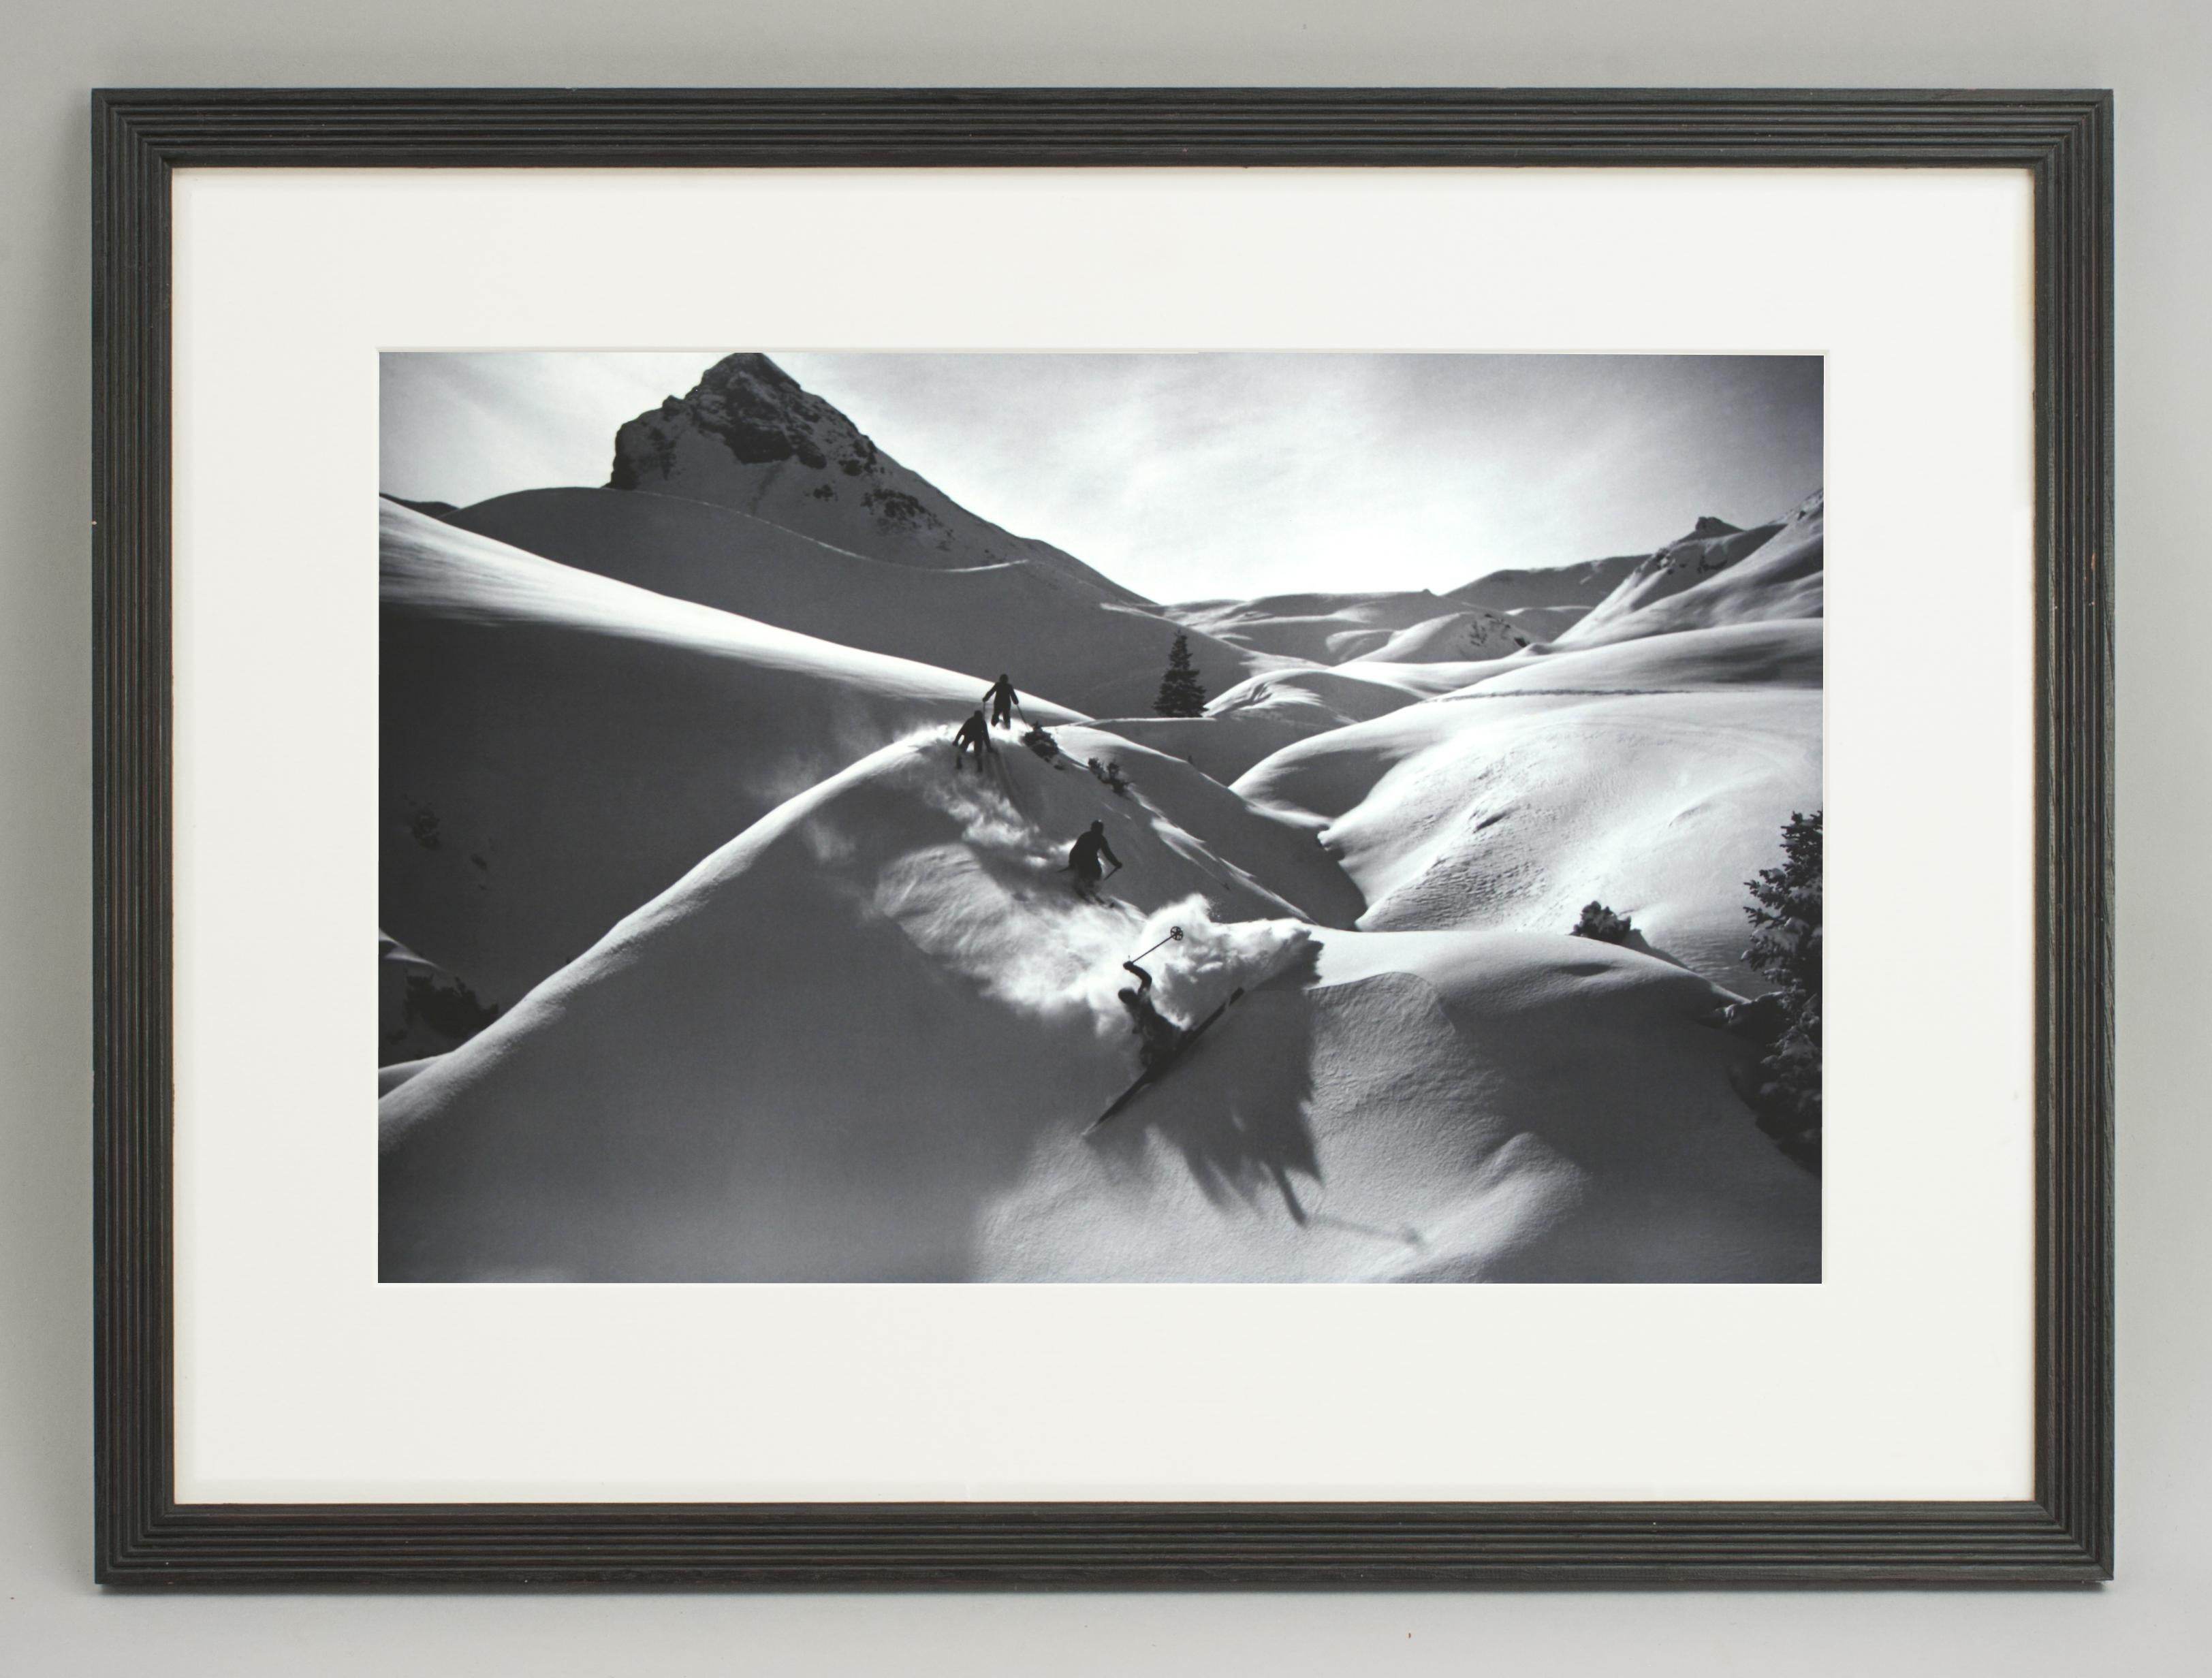 'VIRGIN POWDER', a modern framed and mounted black and white photograph after an original 1930's skiing photograph. The frame is black with a burgundy undercoat, the glazing is clarity+ premium synthetic glass. Black & white alpine photos are the